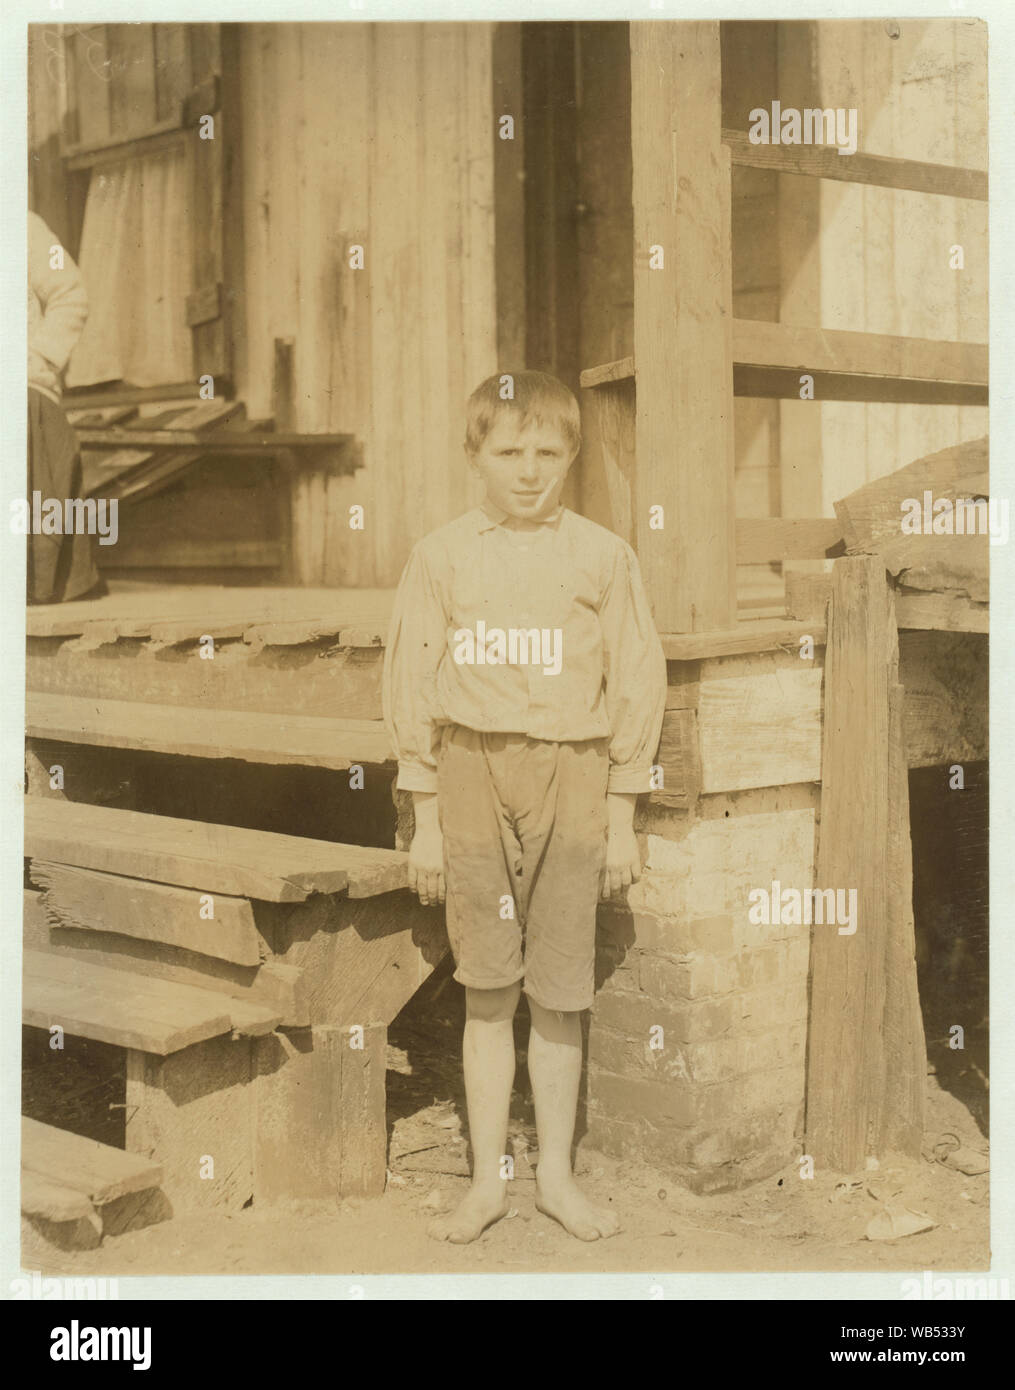 Eleven-year old oyster shucker. Shucks seven pots a day. Varn and Platt Canning Co. Abstract: Photographs from the records of the National Child Labor Committee (U.S.) Stock Photo